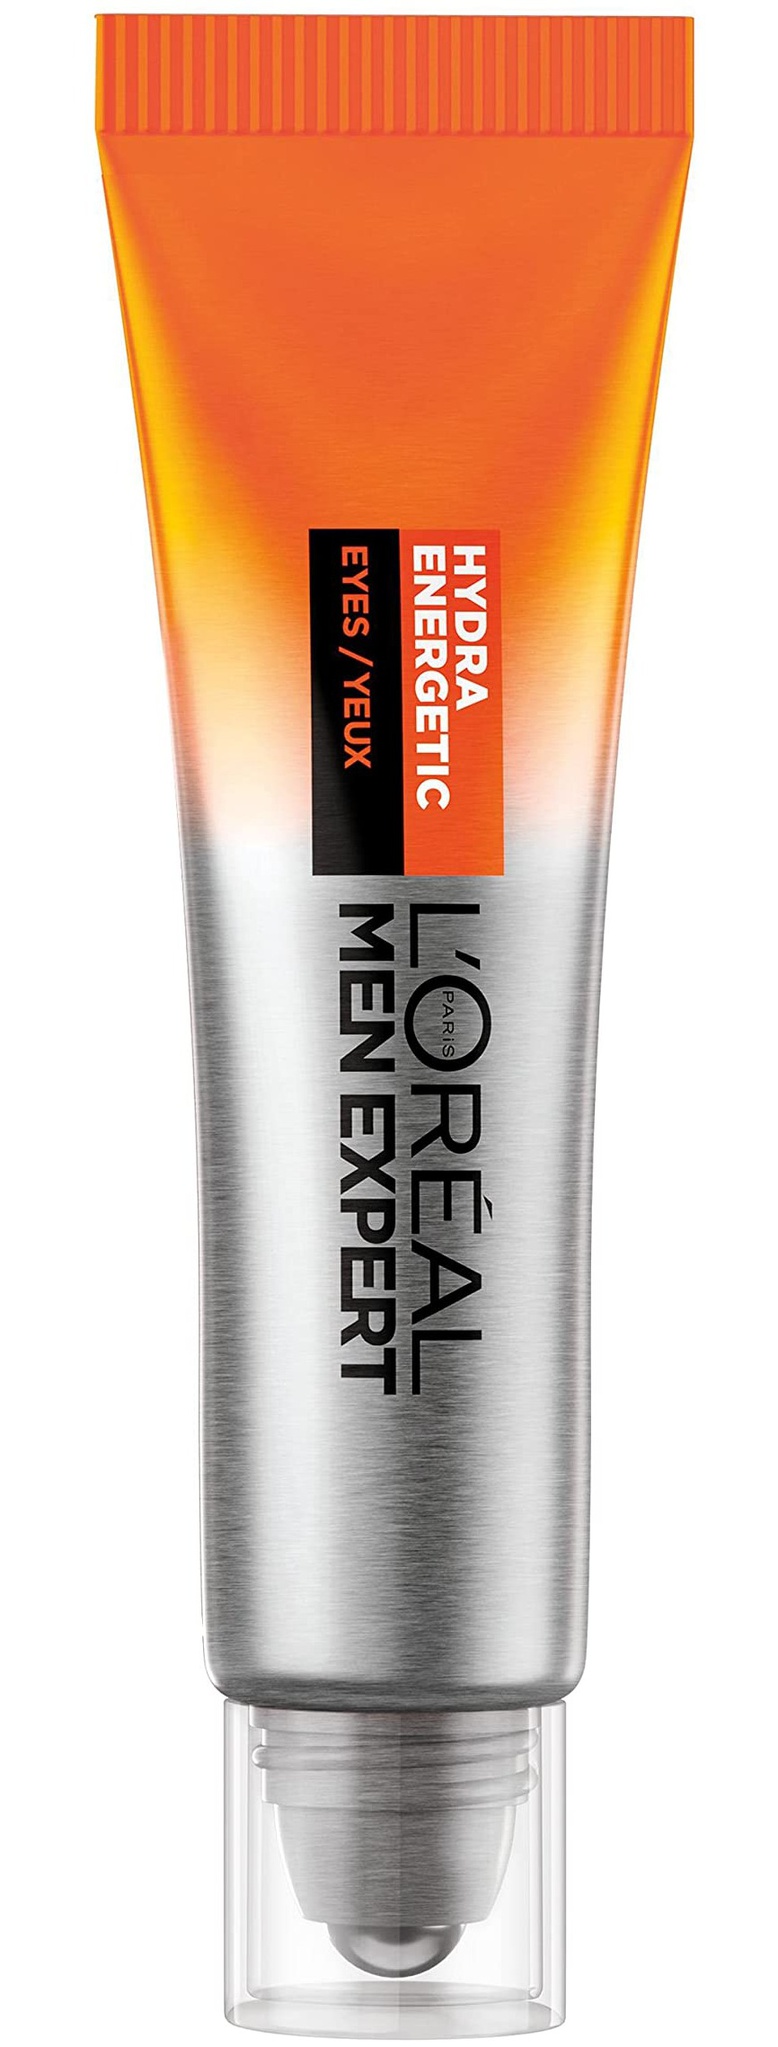 L'Oreal Hydra Energetic Roll-on